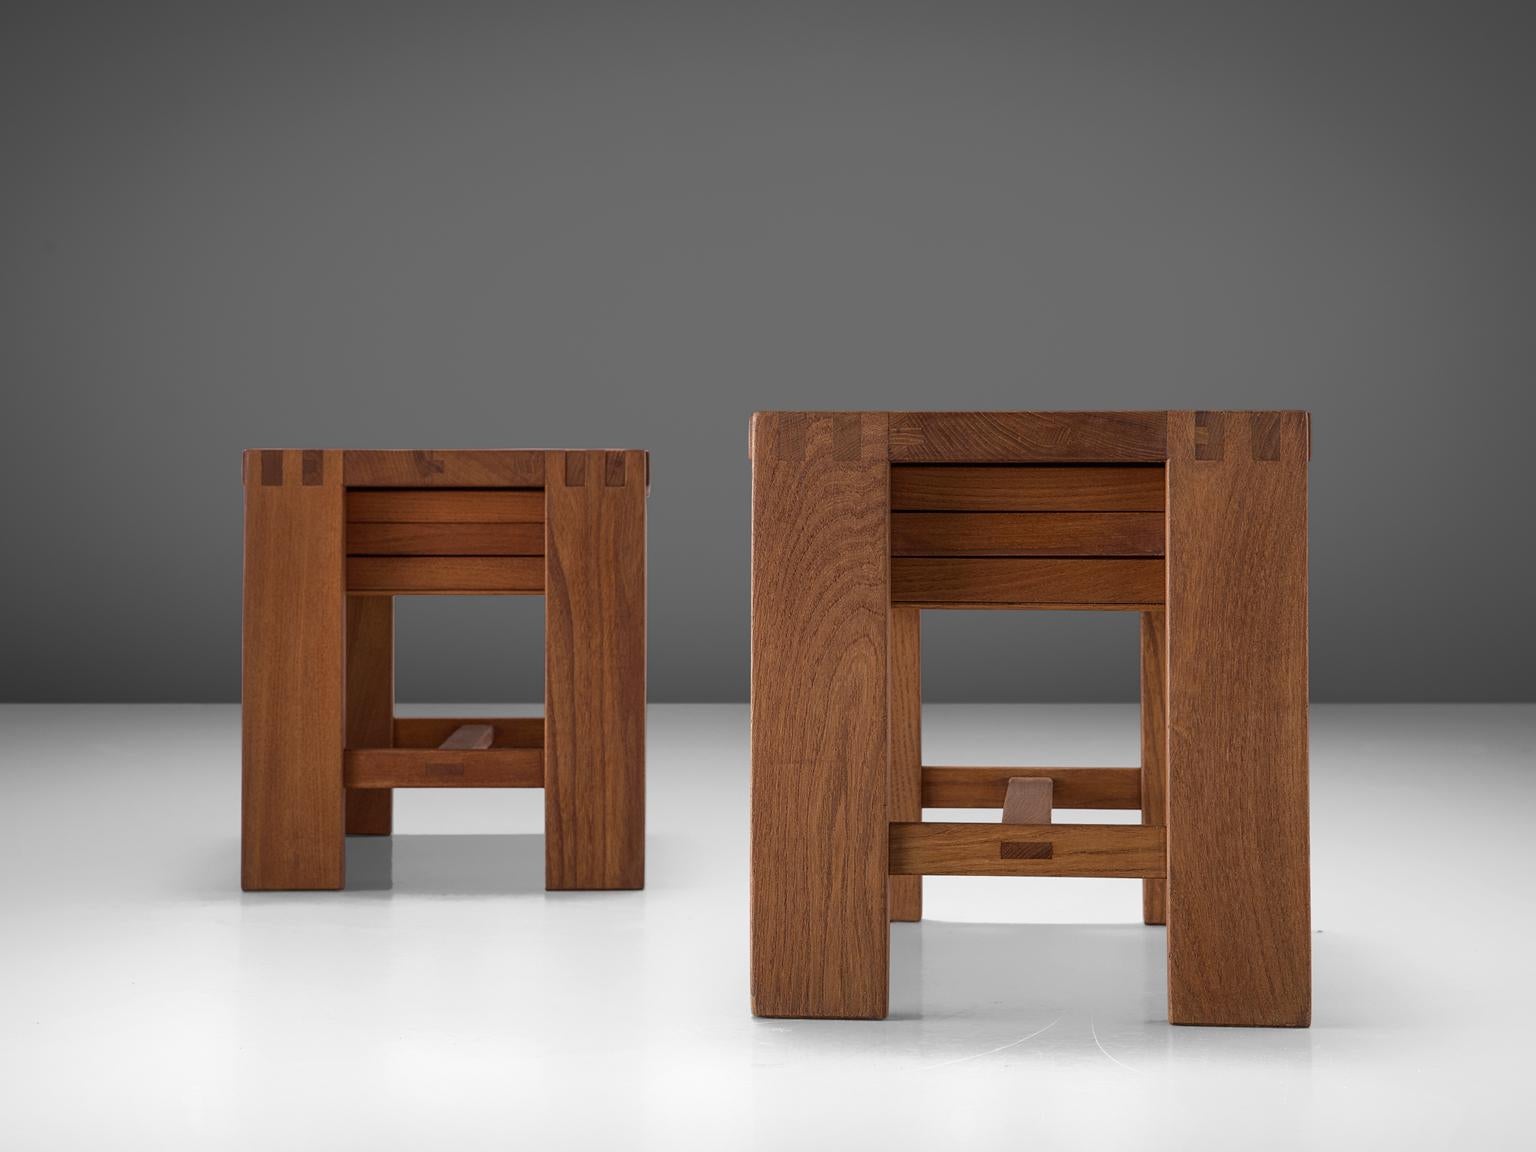 Pierre Chapo, nightstands T7 or side tables, elm, France, 1960s.

These side tables are designed by the master woodworker Pierre Chapo. As of all of his designs, this nightstand has a very modest and simplistic design. All attention goes to the